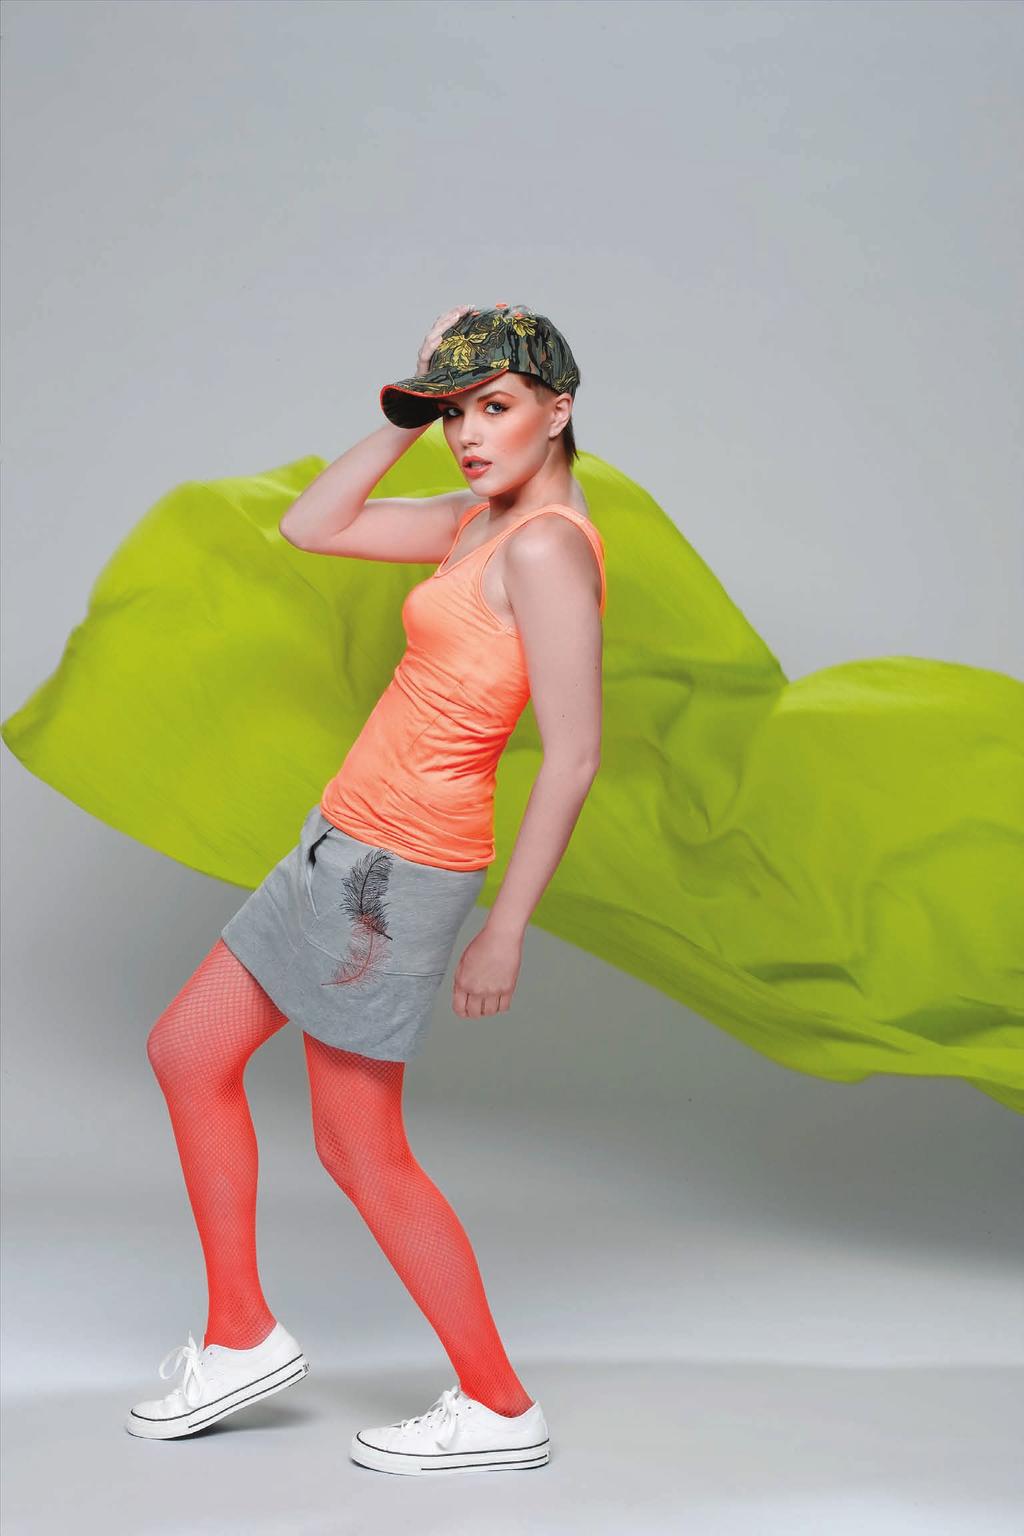 neon delight Zesty neon orange has left its earthy sisters in the dust, as it saucily pops on the edge of a trendy camo hat, brightens a sheer tank, goes metallic in ostrichfeather-inspired